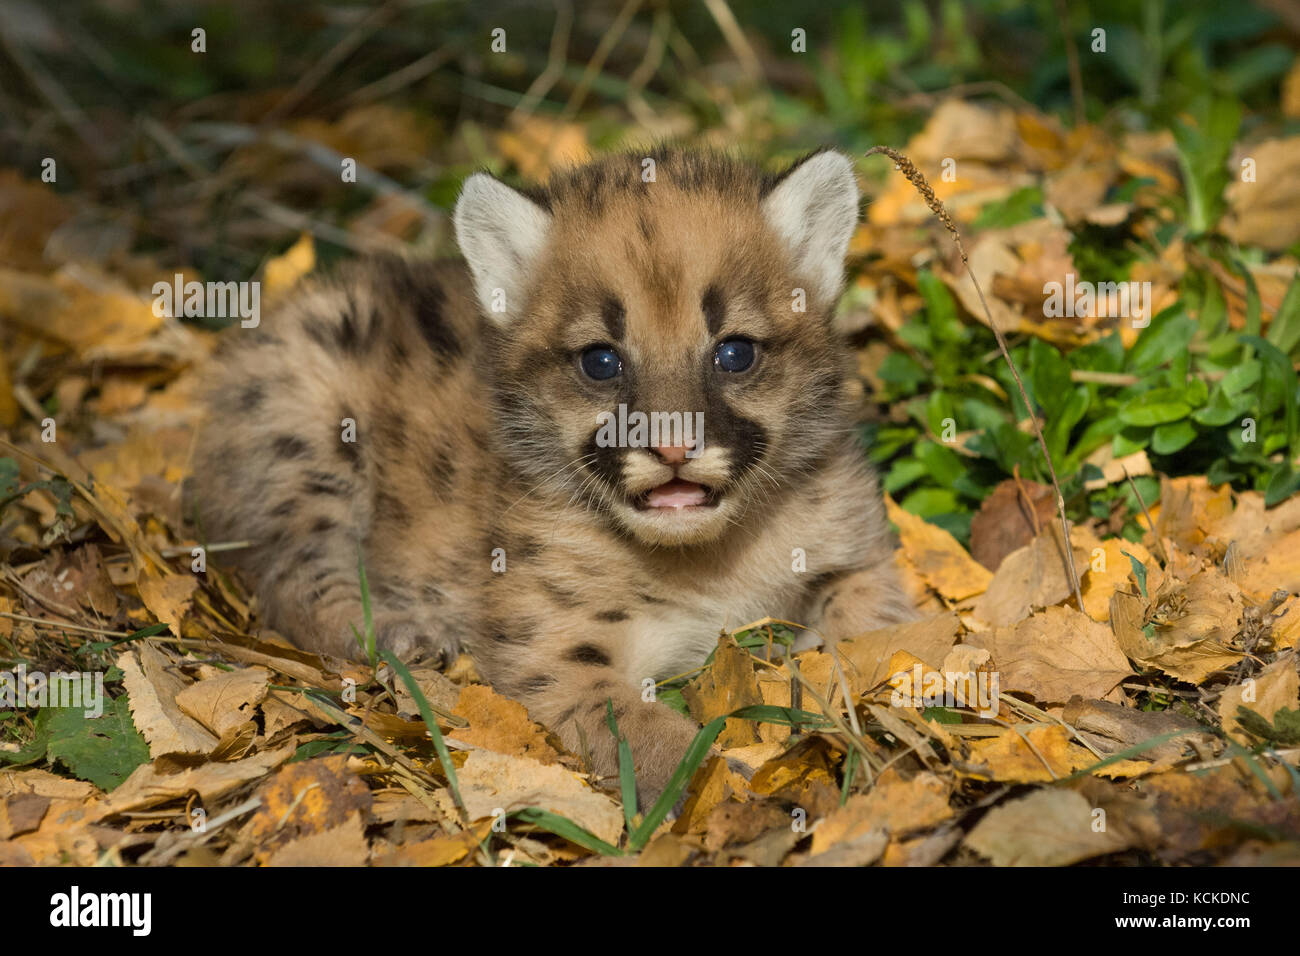 Very young Cougar kitten, Puma concolor, in autumn leaves, Montana, USA Stock Photo